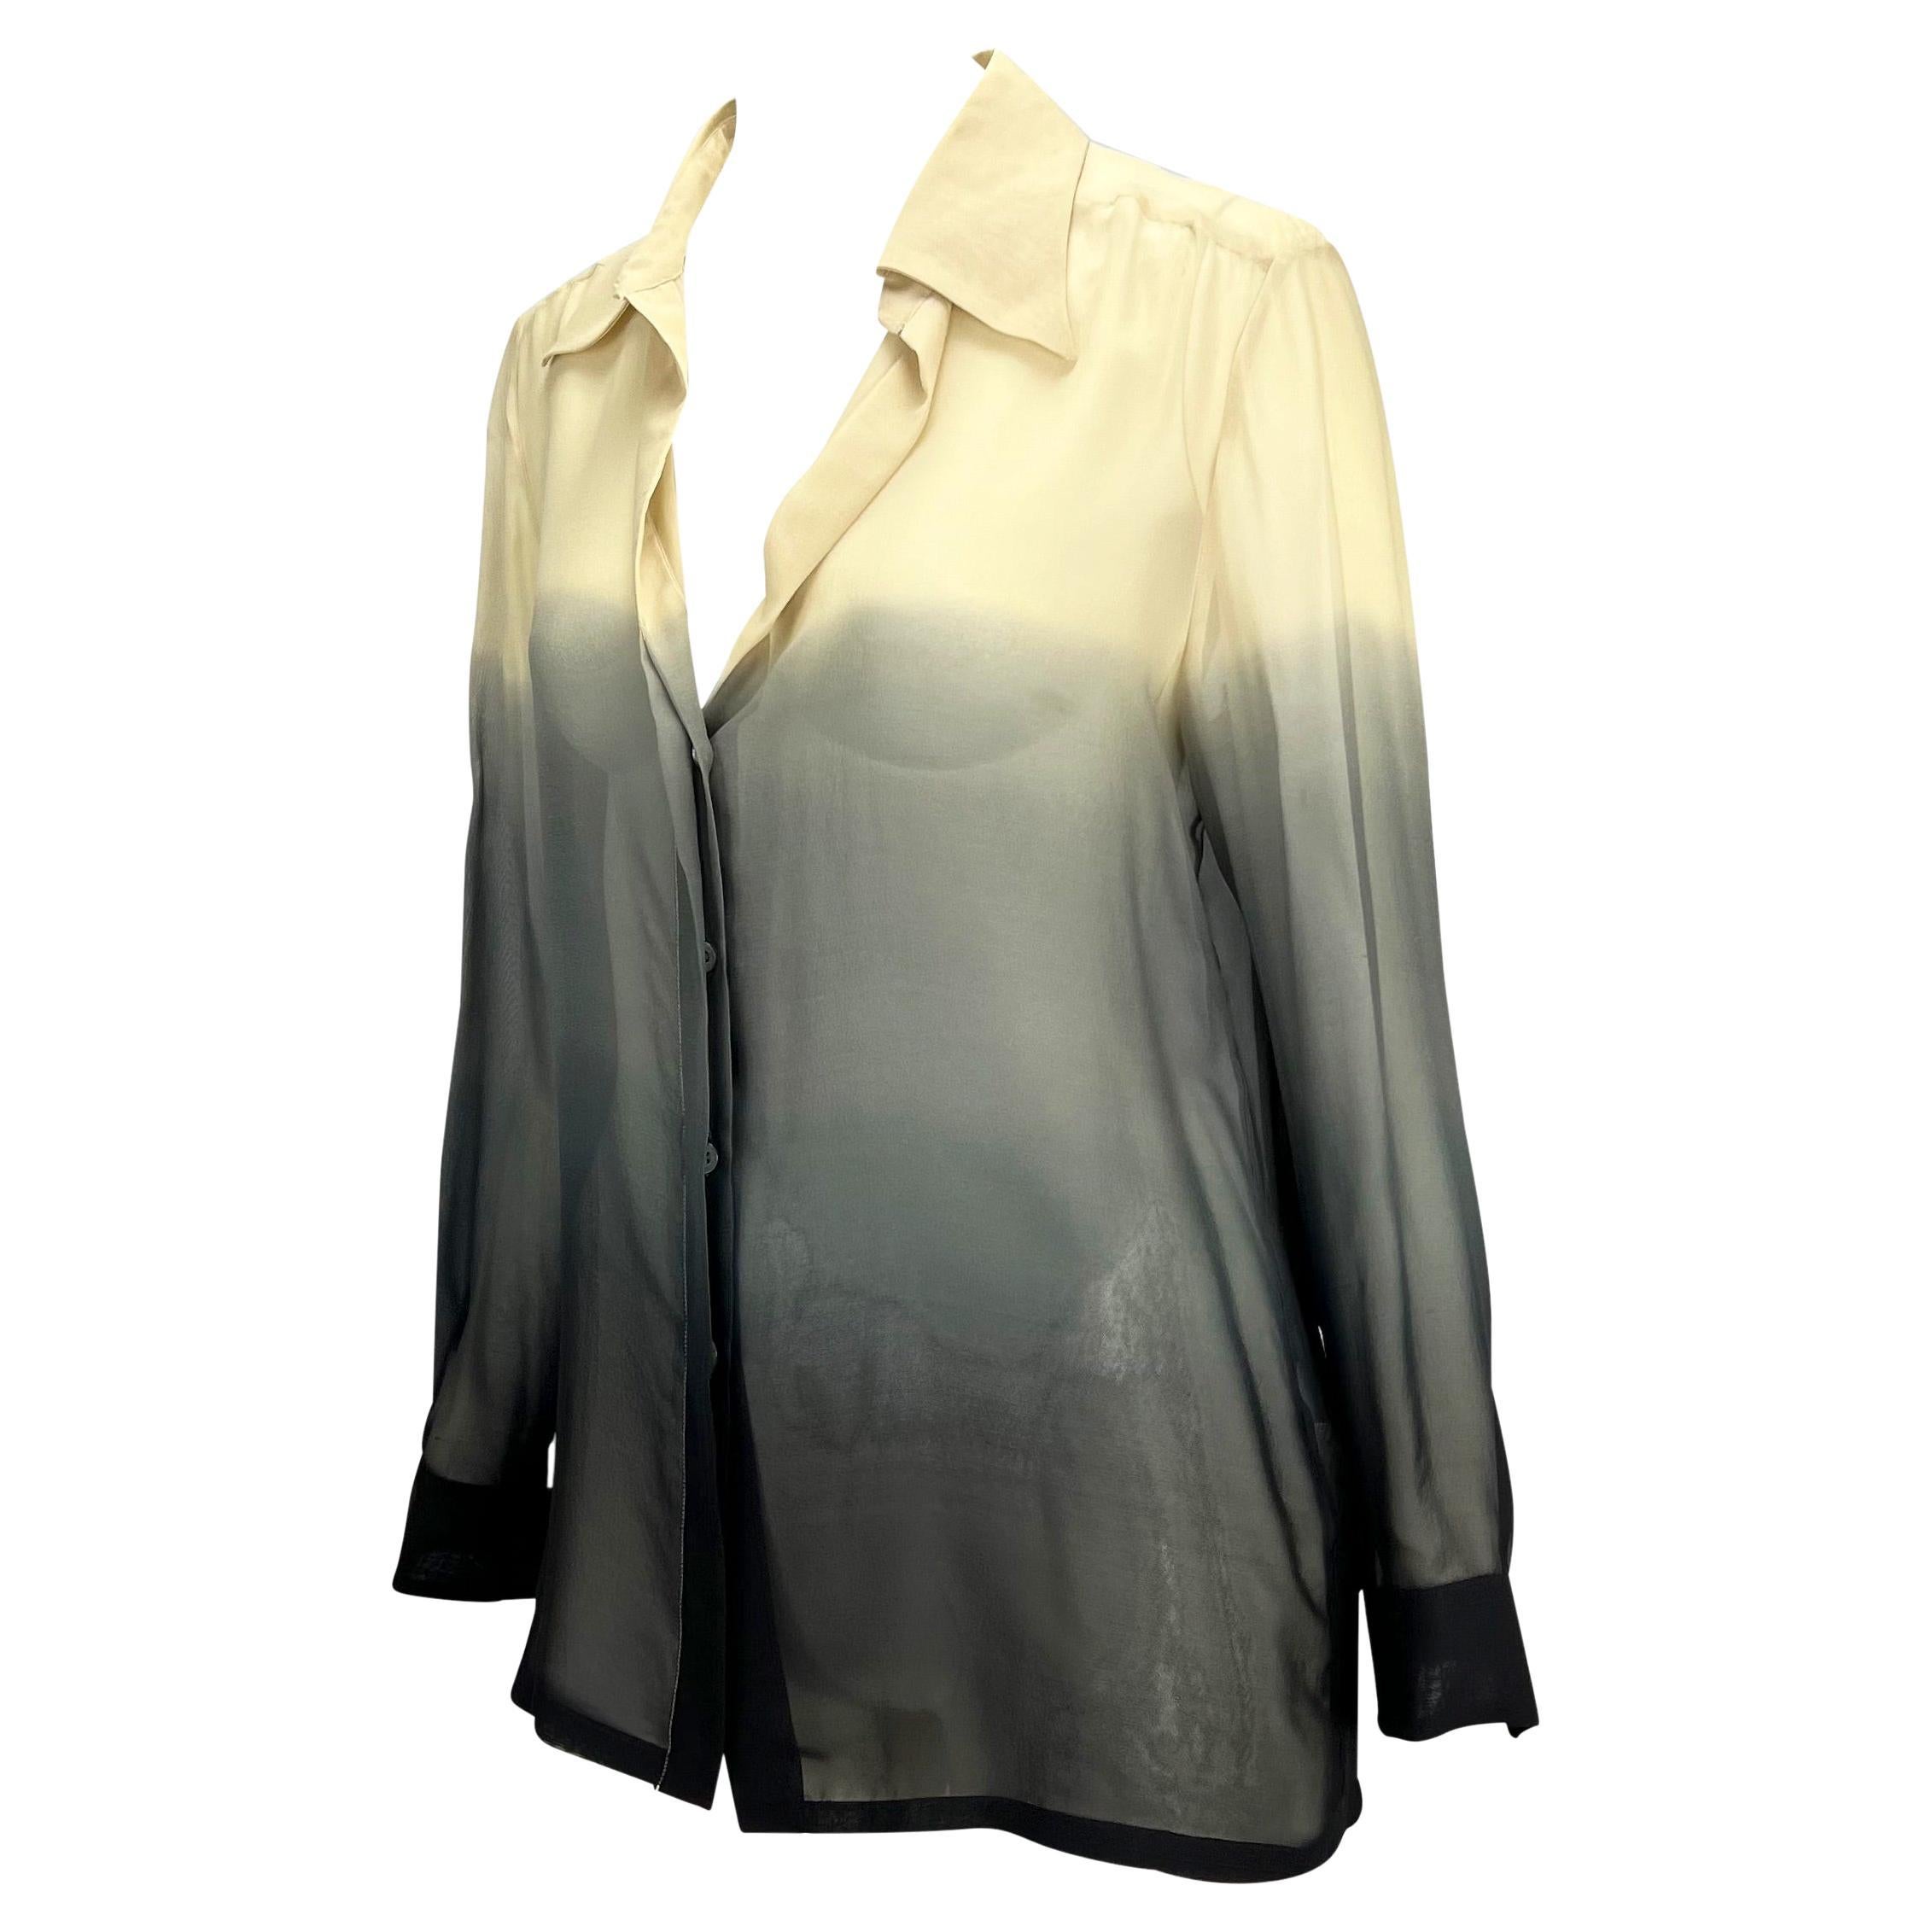 Presenting a beautiful sheer ombré Gucci shirt, designed by Tom Ford for the Spring/Summer 1997 collection. The button closure stops about halfway up the front for a plunging neckline. Chic and sexy is what Tom Ford does best and this shirt is no